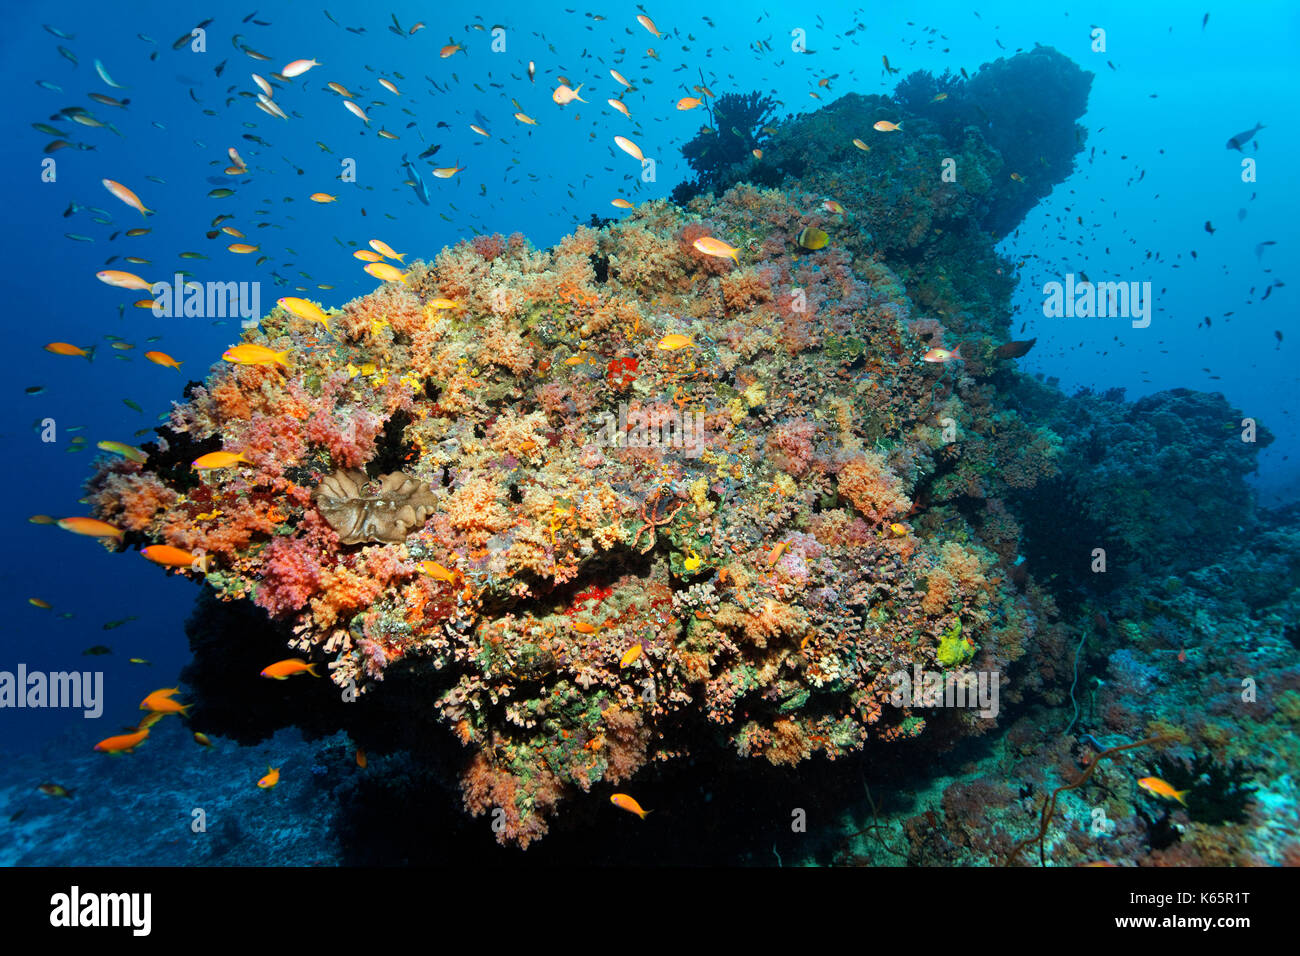 Coral reef, coral block, various red soft corals (Dendronephthya sp.) and swarm of flagfish (Pseudanthias sp.), Indian Ocean Stock Photo